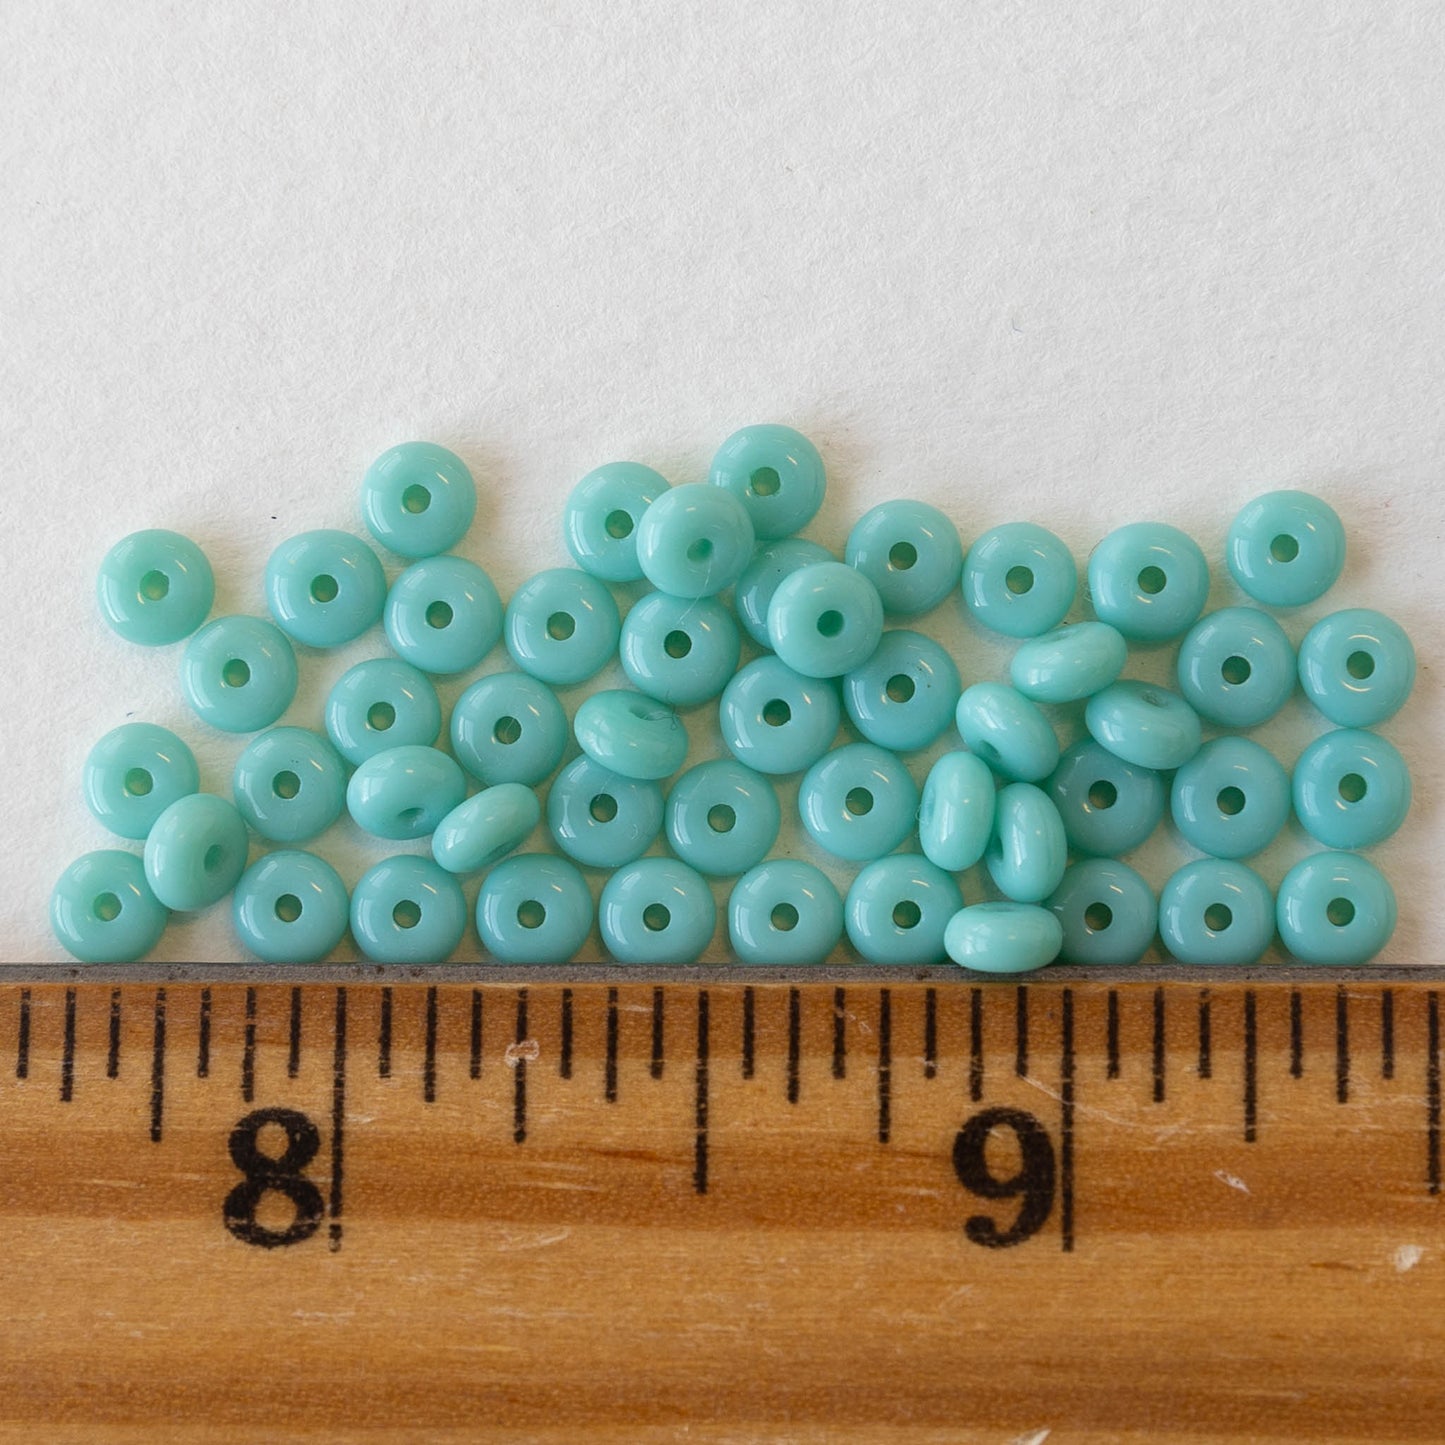 4mm Rondelle Beads - Turquoise - 100 Beads